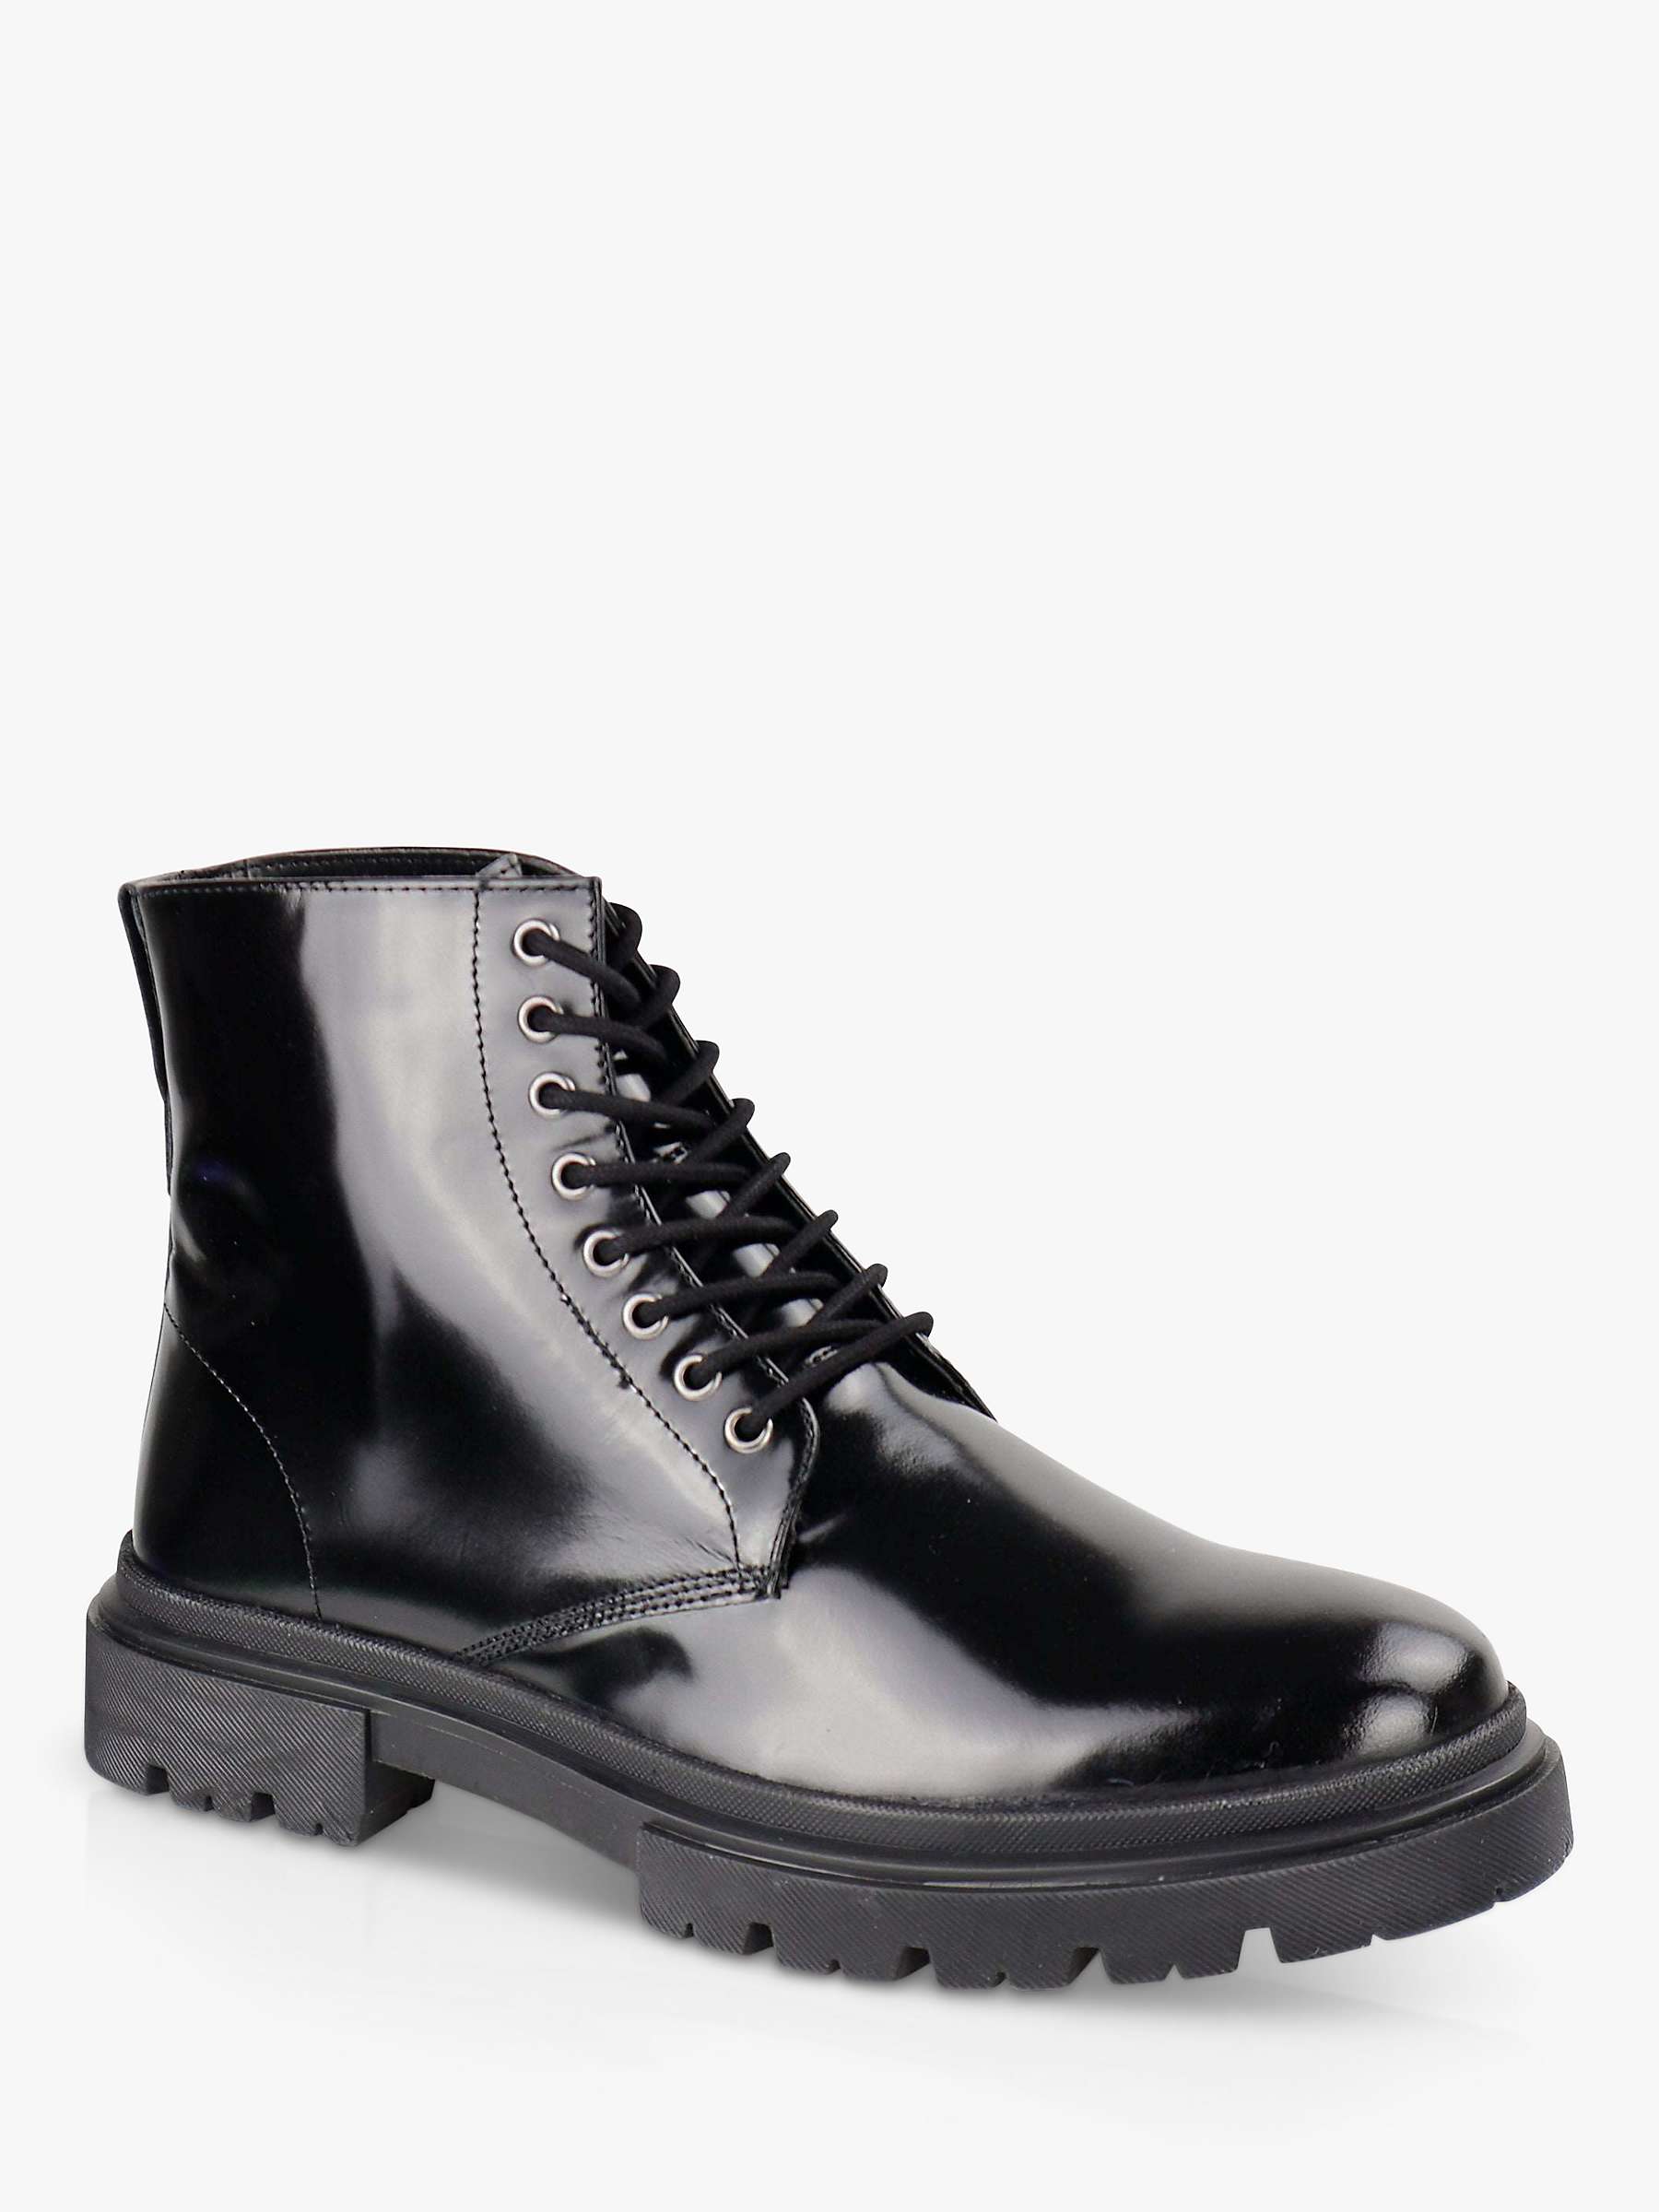 Buy Silver Street London Greenwich Patent Leather Lace Up Ankle Boots, Black Online at johnlewis.com